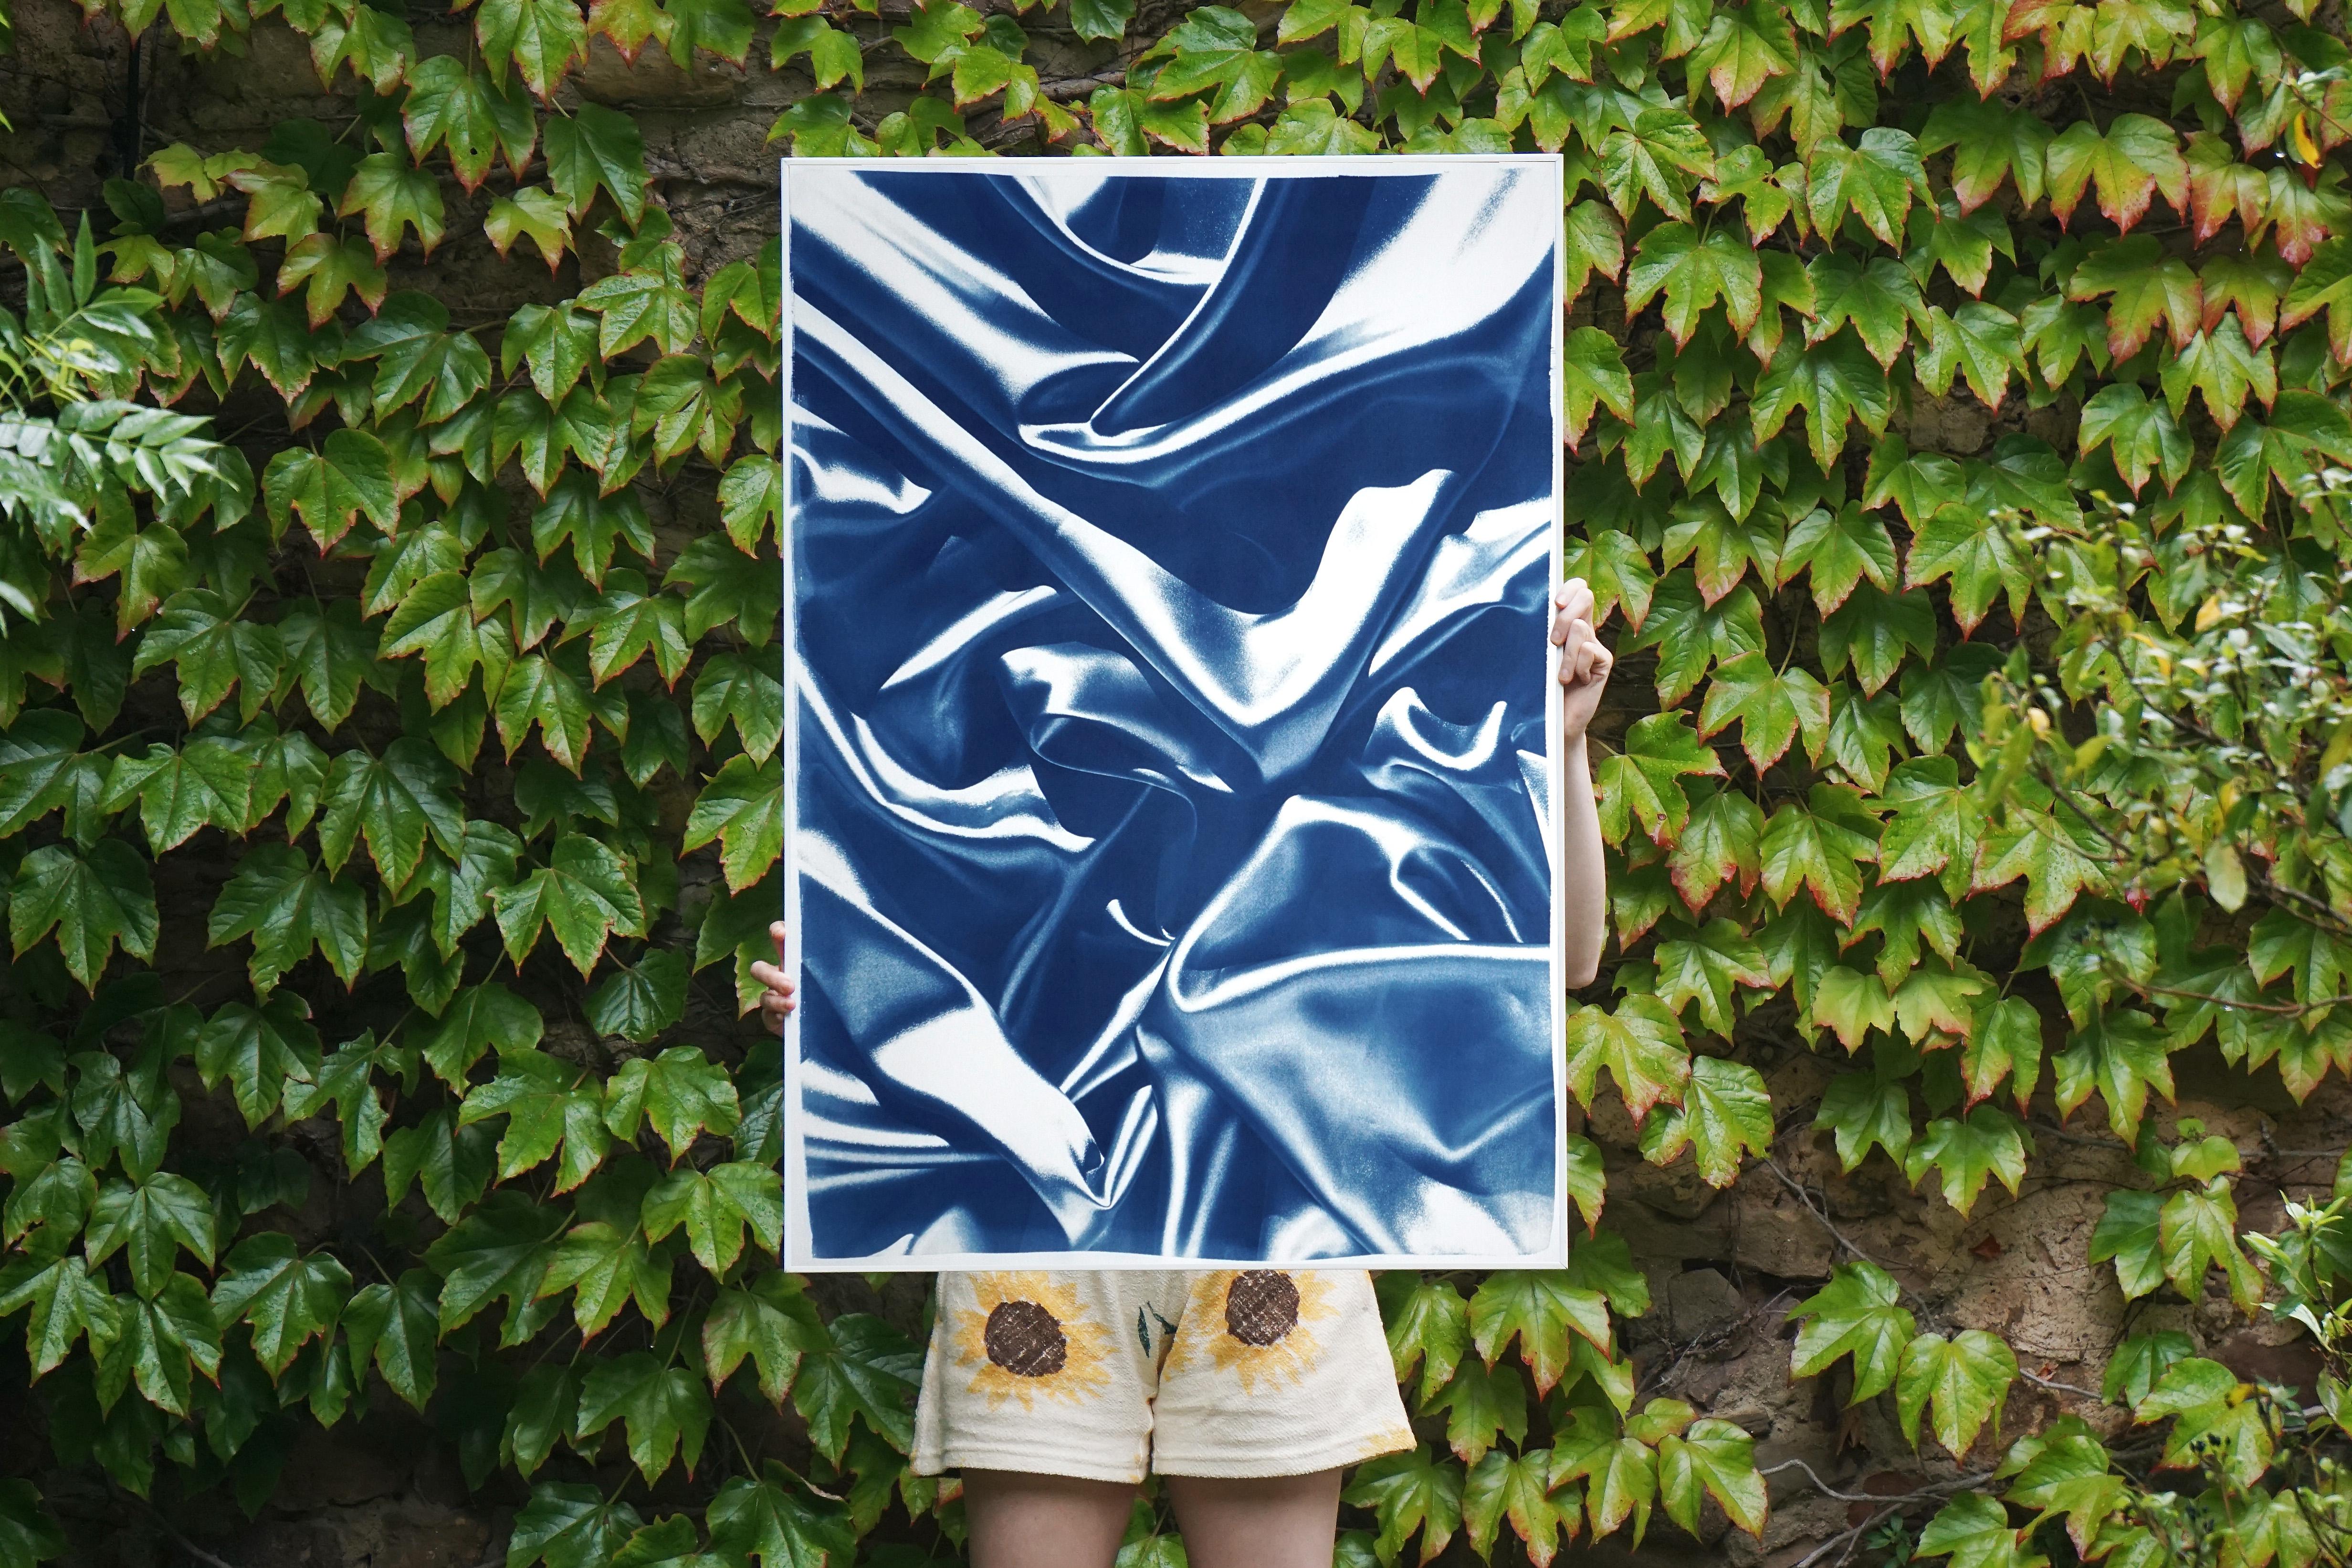 This is an exclusive handprinted limited edition cyanotype.

Details:
+ Title: Marble Blue Silk Pattern
+ Year: 2022
+ Edition Size: 50
+ Stamped and Certificate of Authenticity provided
+ Measurements : 70x100 cm (28x 40 in.), a standard frame